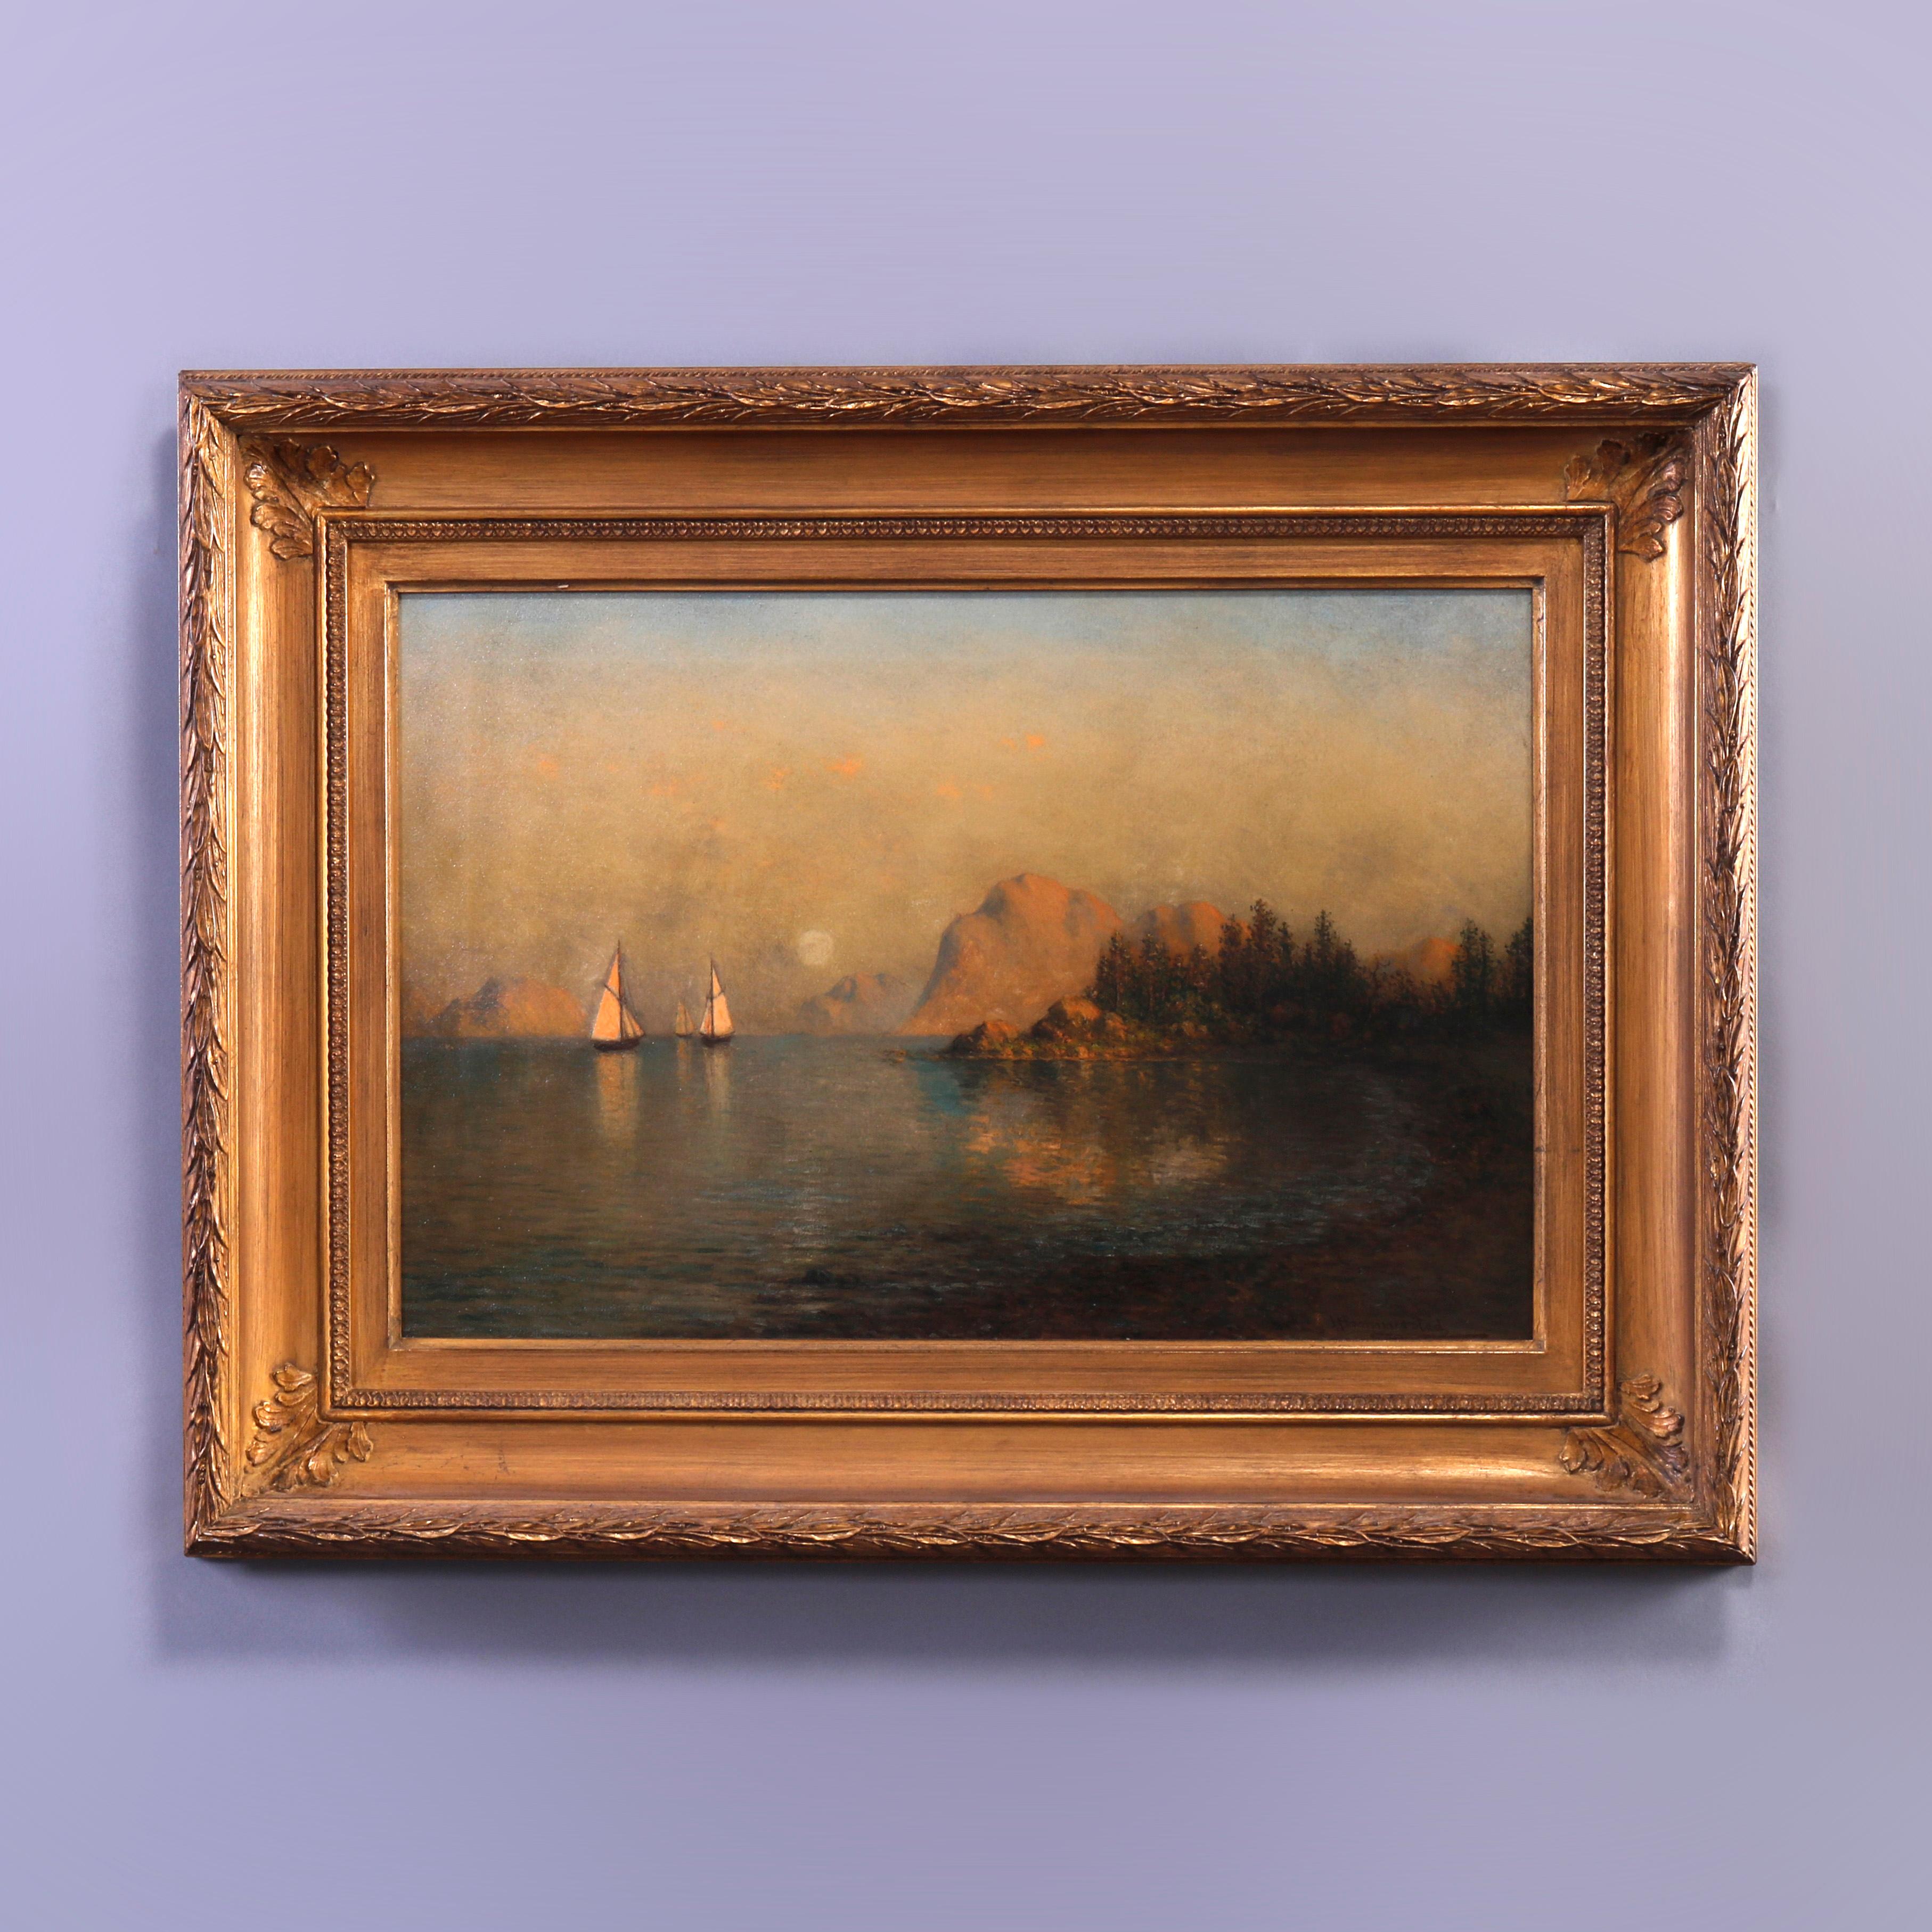 An antique painting by John Olsen Hammerstad offers oil on canvas coastal scene with sailboats and mountainous background, artist signed lower right, information card as photographed, seated in giltwood frame, c1900

Measures - overall 25'' H x